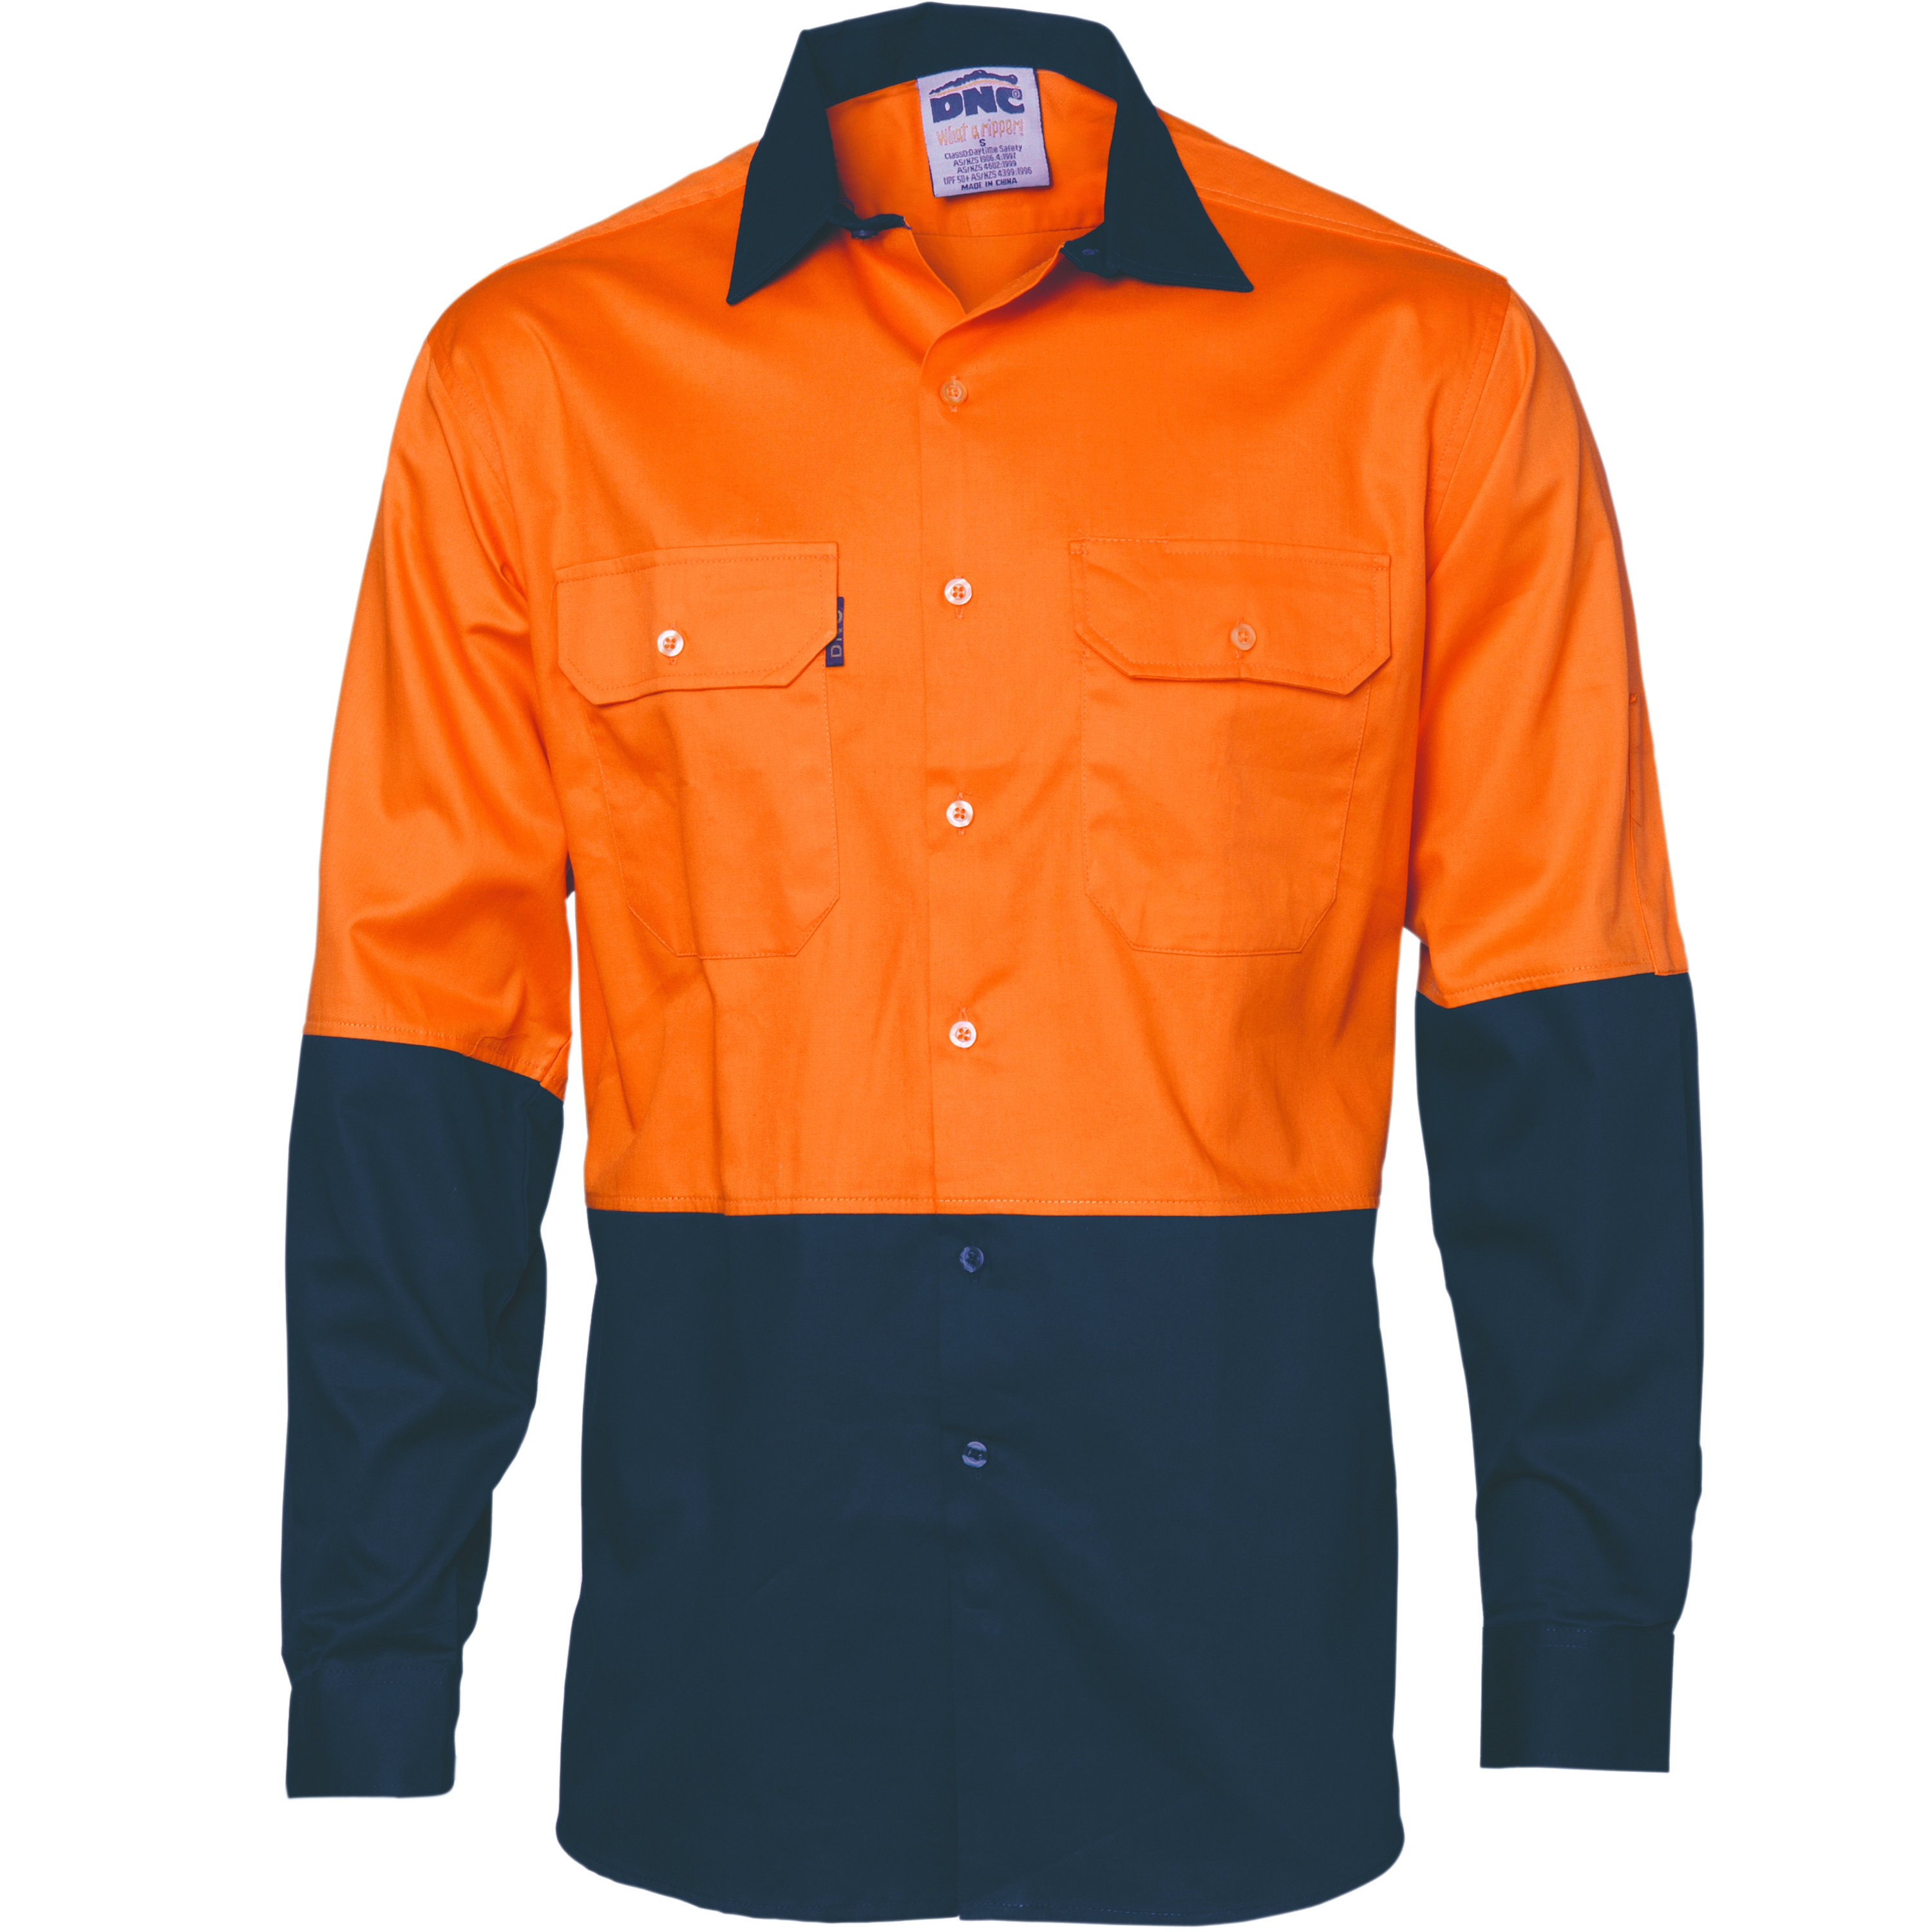 DNC HIVIS LONG SLEEVE COTTON DRILL SHIRT 190GSM 3832 TWO TONE